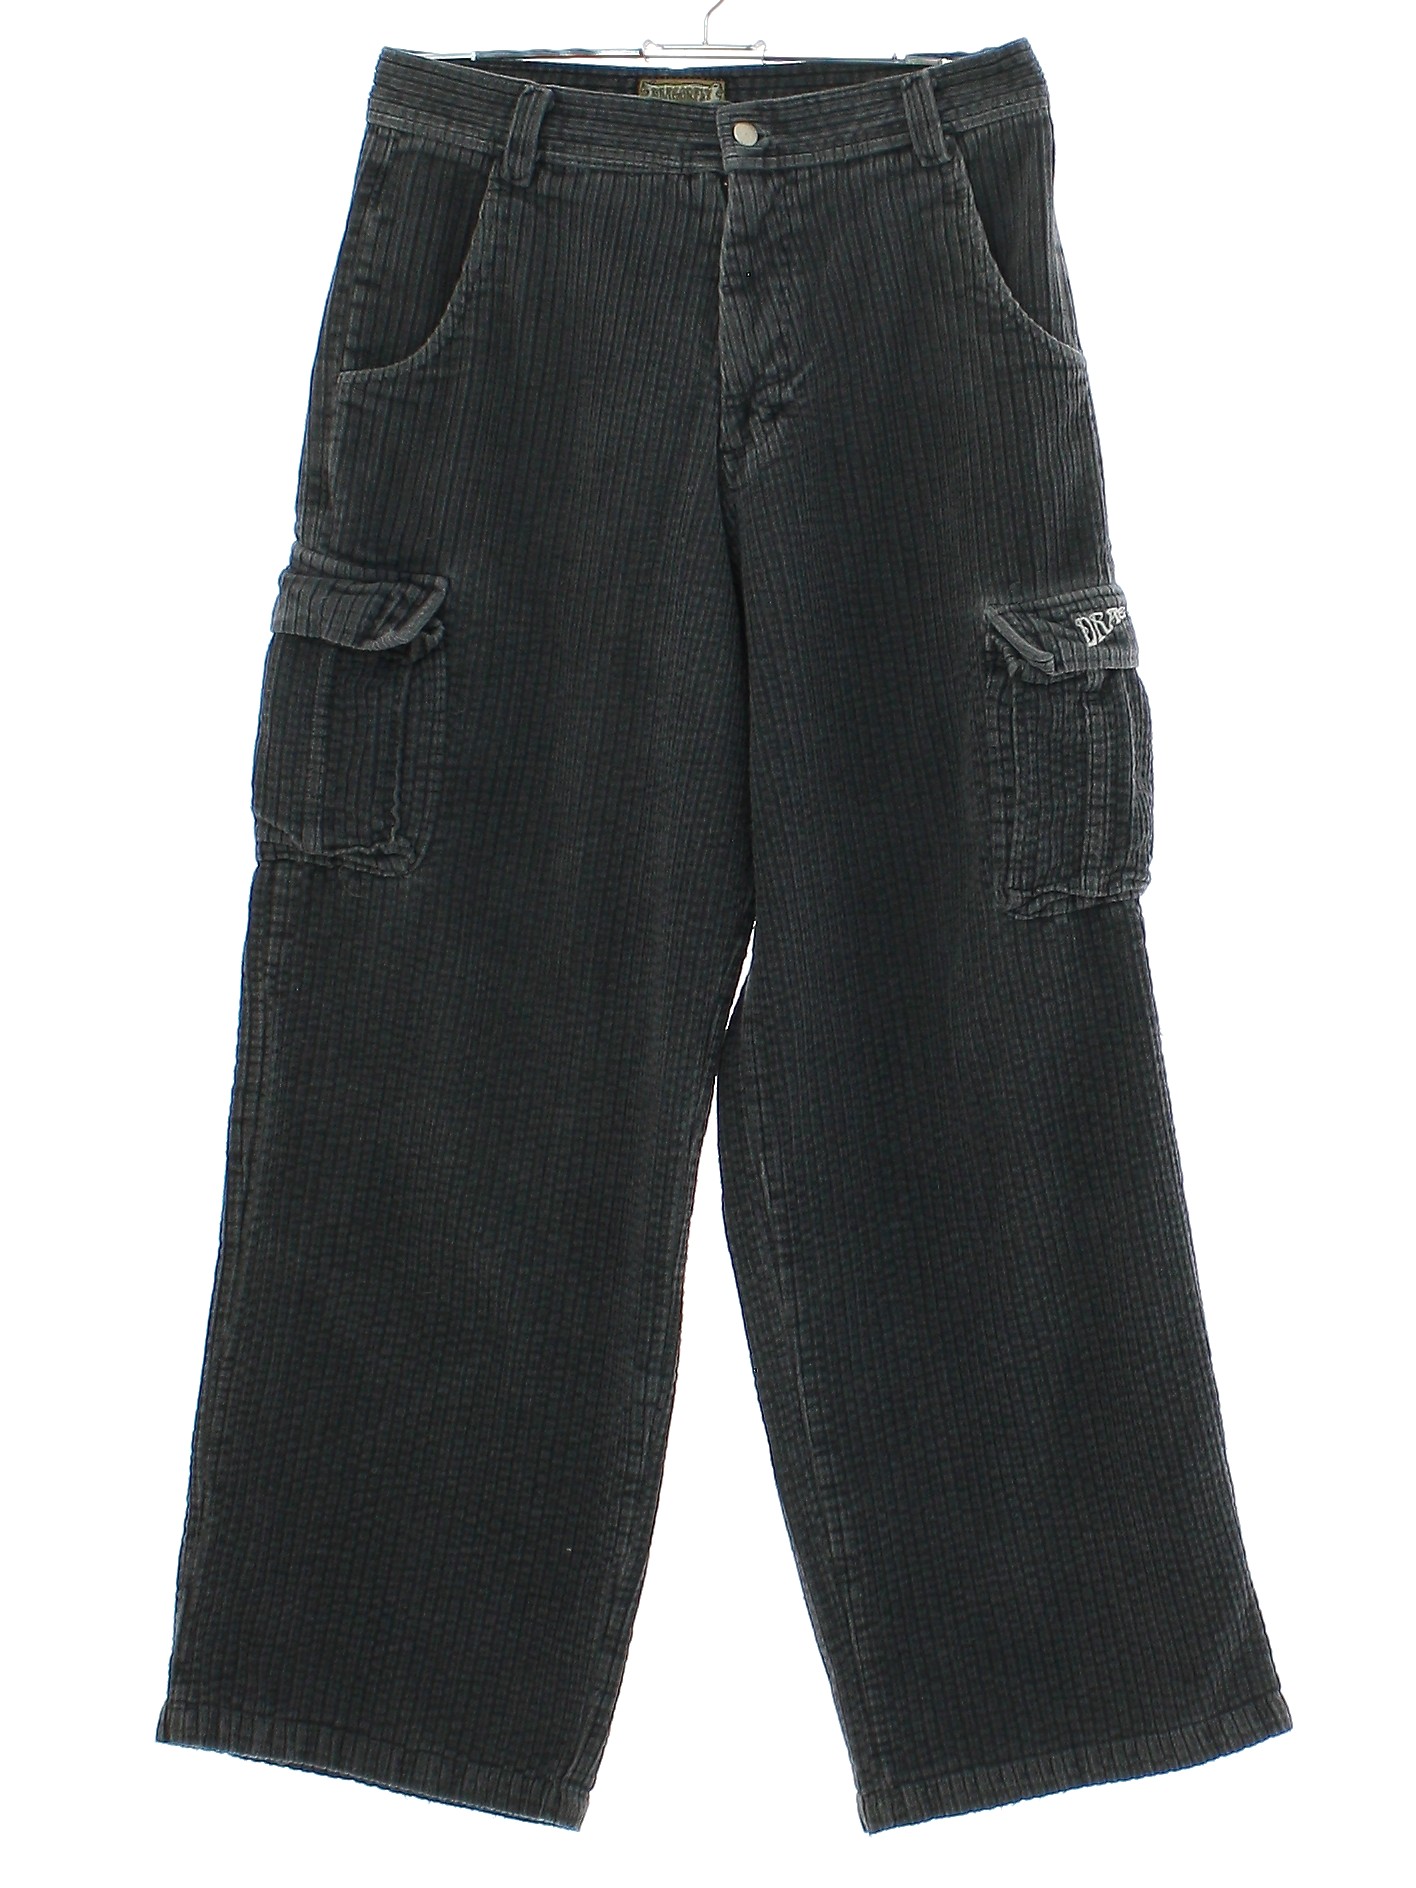 Retro 1990s Pants: Early 90s -Dragonfly- Mens dark gray solid colored ...